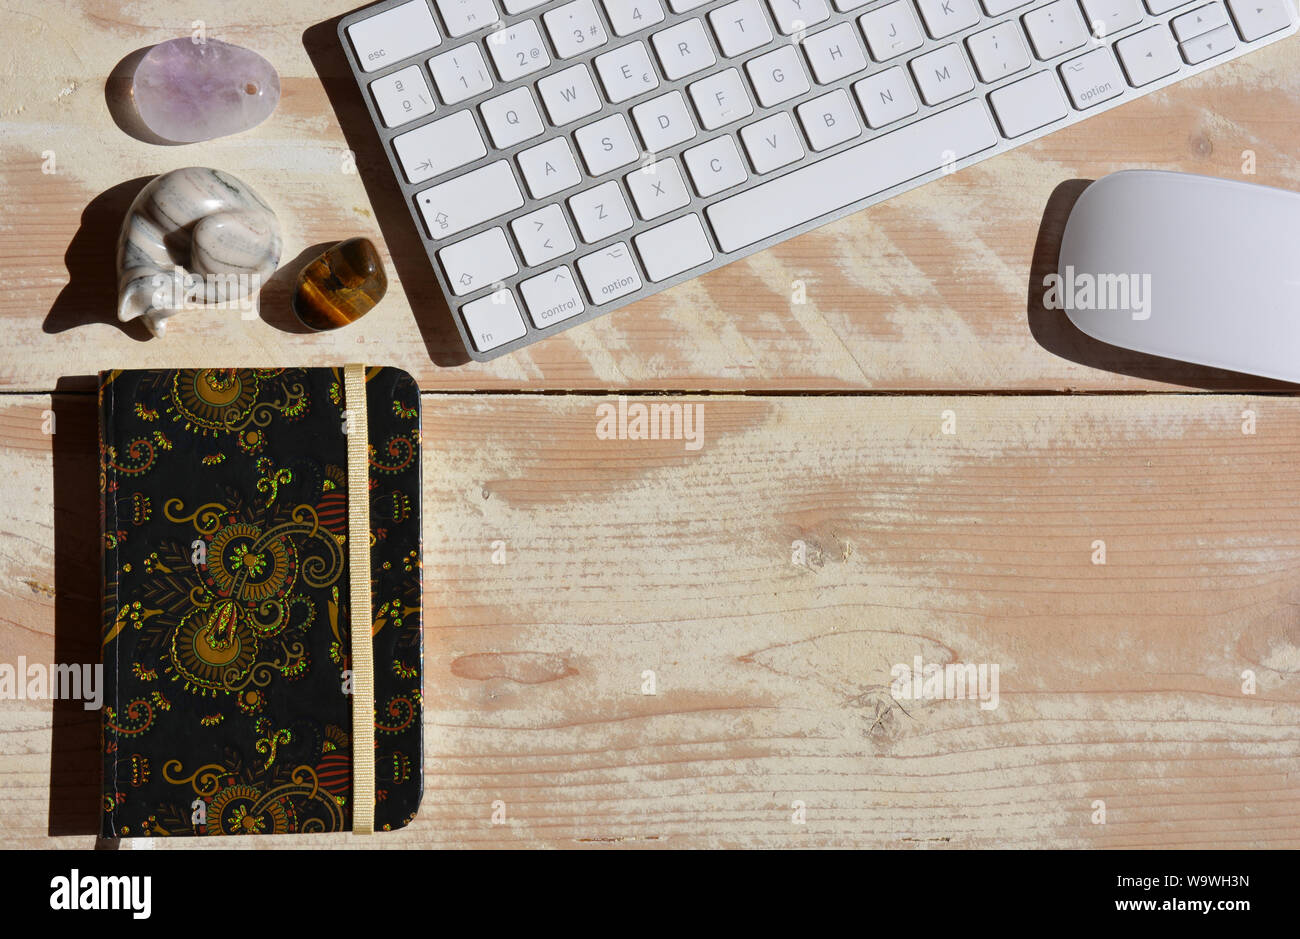 Modern workspace, wireless keyboard and mouse, notebook and semi precious gemstones including tiger's eye. Flat lay high angle view with copy space. Stock Photo